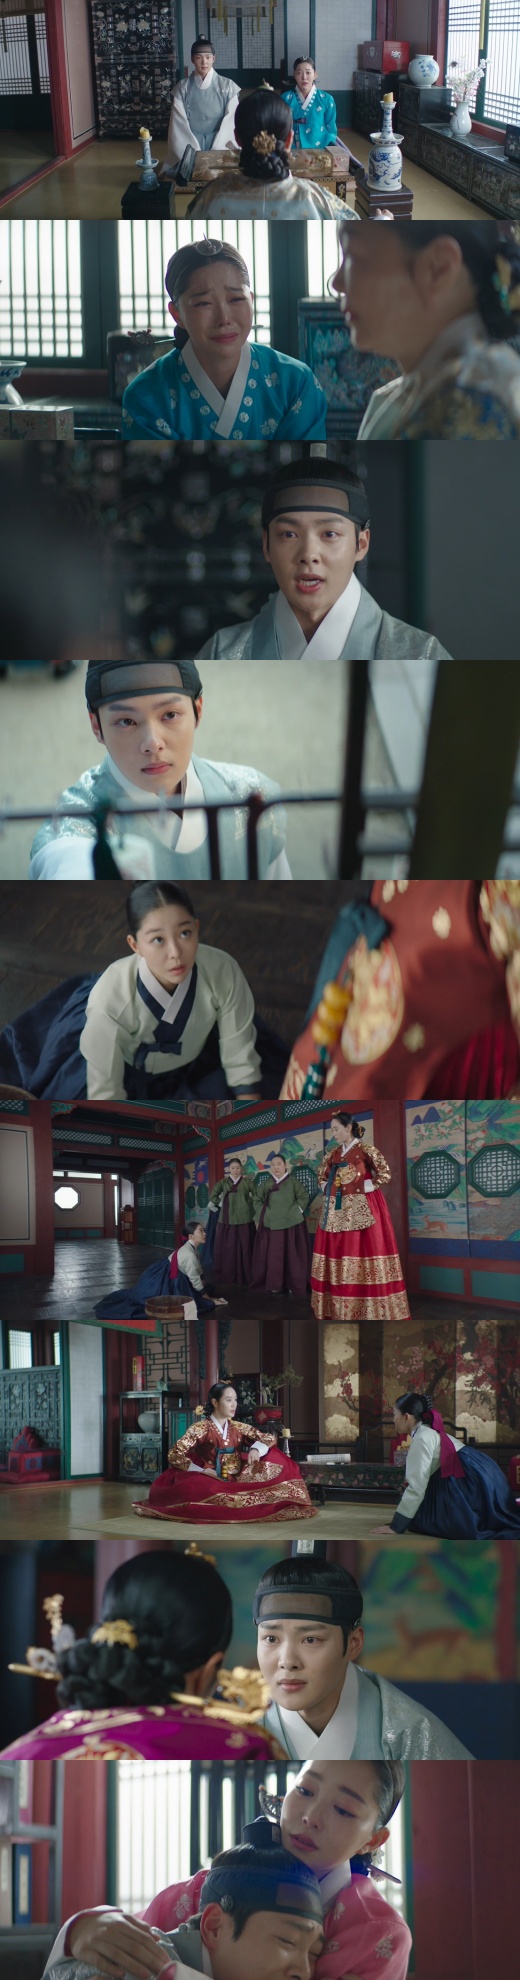 Kim Hye-soo of the cable channel tvNs Saturday-Sunday drama Schrup (directed by playwright Park Barra Kim Hyung-sik) forgave Kim Ga-eun with a broad heart.In Schrup, which was broadcast on the afternoon of the 19th, the last story of the prince competition was drawn.Seongnam Dae-gun (mun sang-min), Uiseong group (Strong as we) and Bogeom-gun (Kim Min-ki) were among the final candidates, while Seongnam Dae-gun took the crown prince position.Tae So-yong (Kim Ga-eun), who had Dabi (Kim Hye-soo) as his backing, was abruptly abandoned by Dabi because Hwang Suk-won (Ok Ja-yeon) and Yeonguijeong (Kim Eui-seong) plotted to make the Uiseong group the crown prince.The Queen Dowager called in Tae So-yong and the Bogeom soldiers to collect their favors. I never thought of you as a prince. Did you think you would become a real Crown Prince, born of a lowly mother?It was Kim Hye-soo who appeared in front of Taesoyongs mother and son.Then, he treated Taesoyong coldly and instructed him to do chores in the middle palace.However, Hwaryeongs true heart was different. Tae Soo-yong, tired of chores, fell asleep in the bed of the middle war.Hwaryeong said, Did you forget the sorrow of your heart because your body was tired? He said, Because of that greed, the swordsman was used and hurt. Think carefully about what to do as a mother from now on.It is okay to say that it is hard if you are sick, he said. It is not only proving your ability to be a tax collector.I want you to give me strength by the side of the taxa. In the ensuing scene, Tae Soo Yong and the sword army were pissed off and hugged me.On the other hand, Hwaryeong recalled the past of Taesoyong, who was the Nine of the Palace before becoming the Concubine, along with Shin Sanggung (Park Jun-myeon). Hwaryeong said, I am also GLOW.When I realized that my lord was not coming to see me in this place, I had a lot of tears. At the same time, he expressed his affection, saying, When Im with Tae So-yong, I smile. I dont see many people like him. If Tae So-yong isnt at the palace, Im bored.